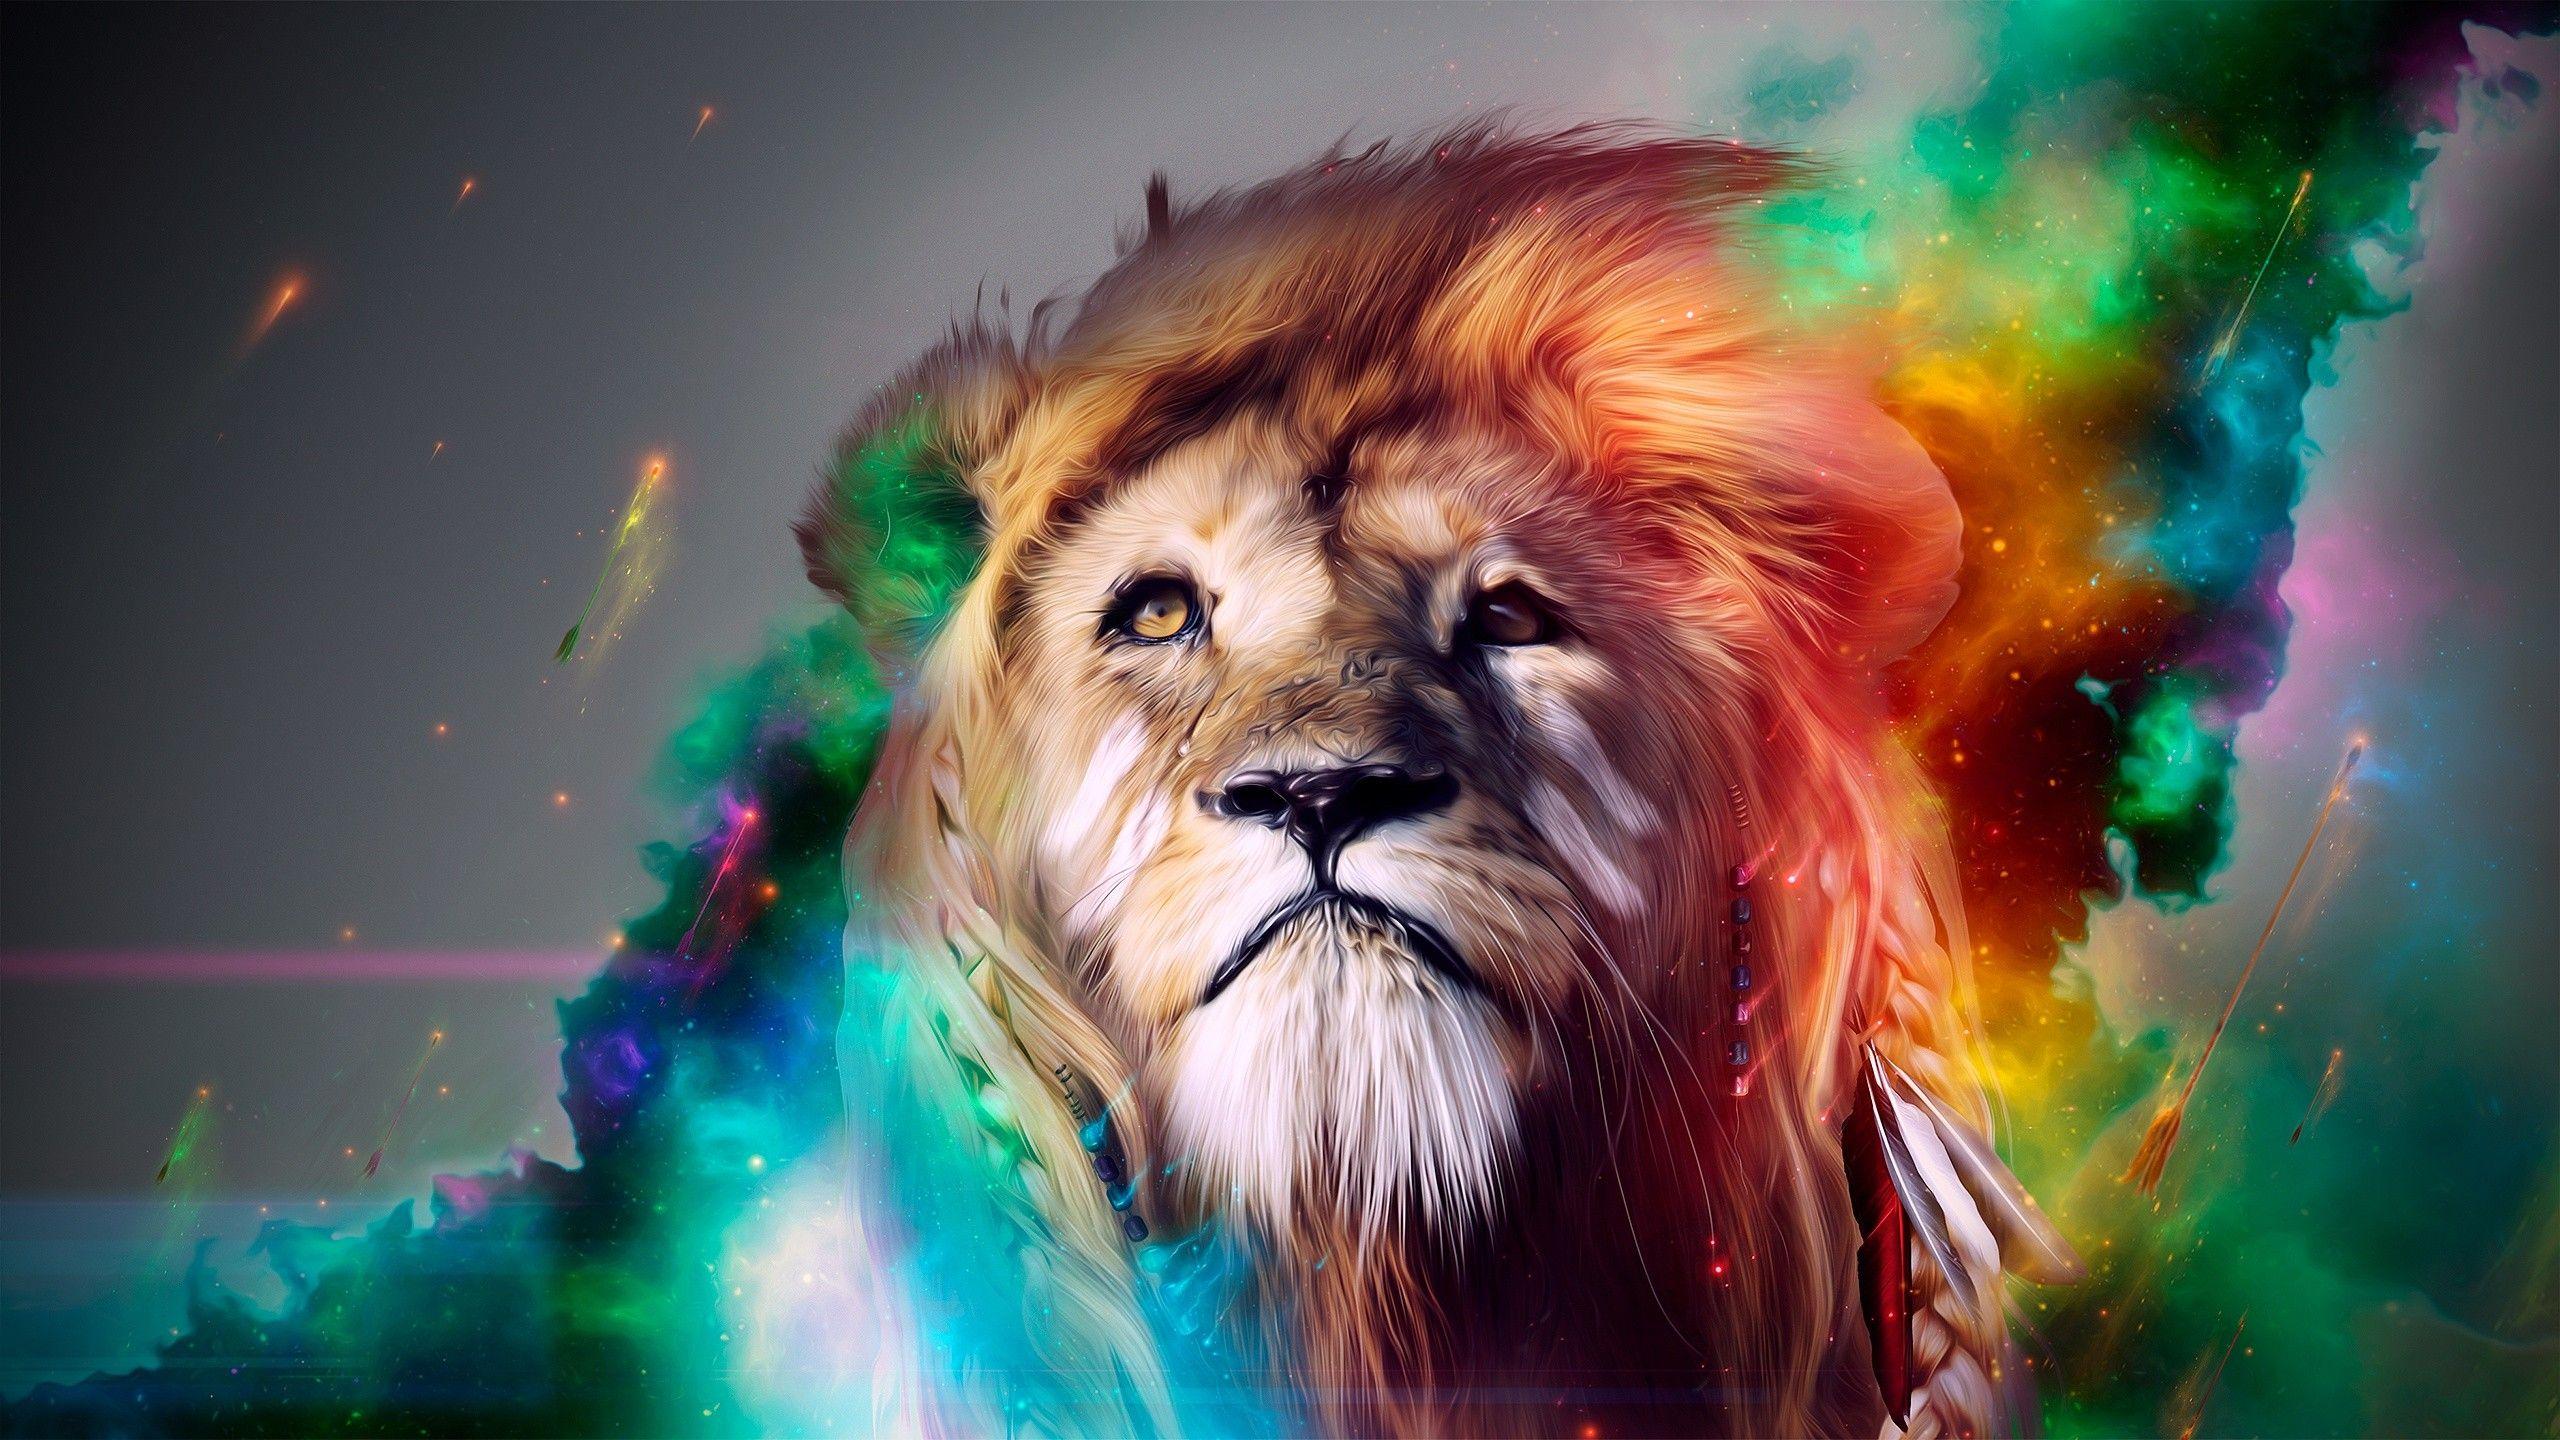 1080p HD Lion Full Hd Wallpaper High Quality Desktop iphone and android   Background and Wallpaper  Anim  Lion wallpaper Hd nature wallpapers  Animal wallpaper